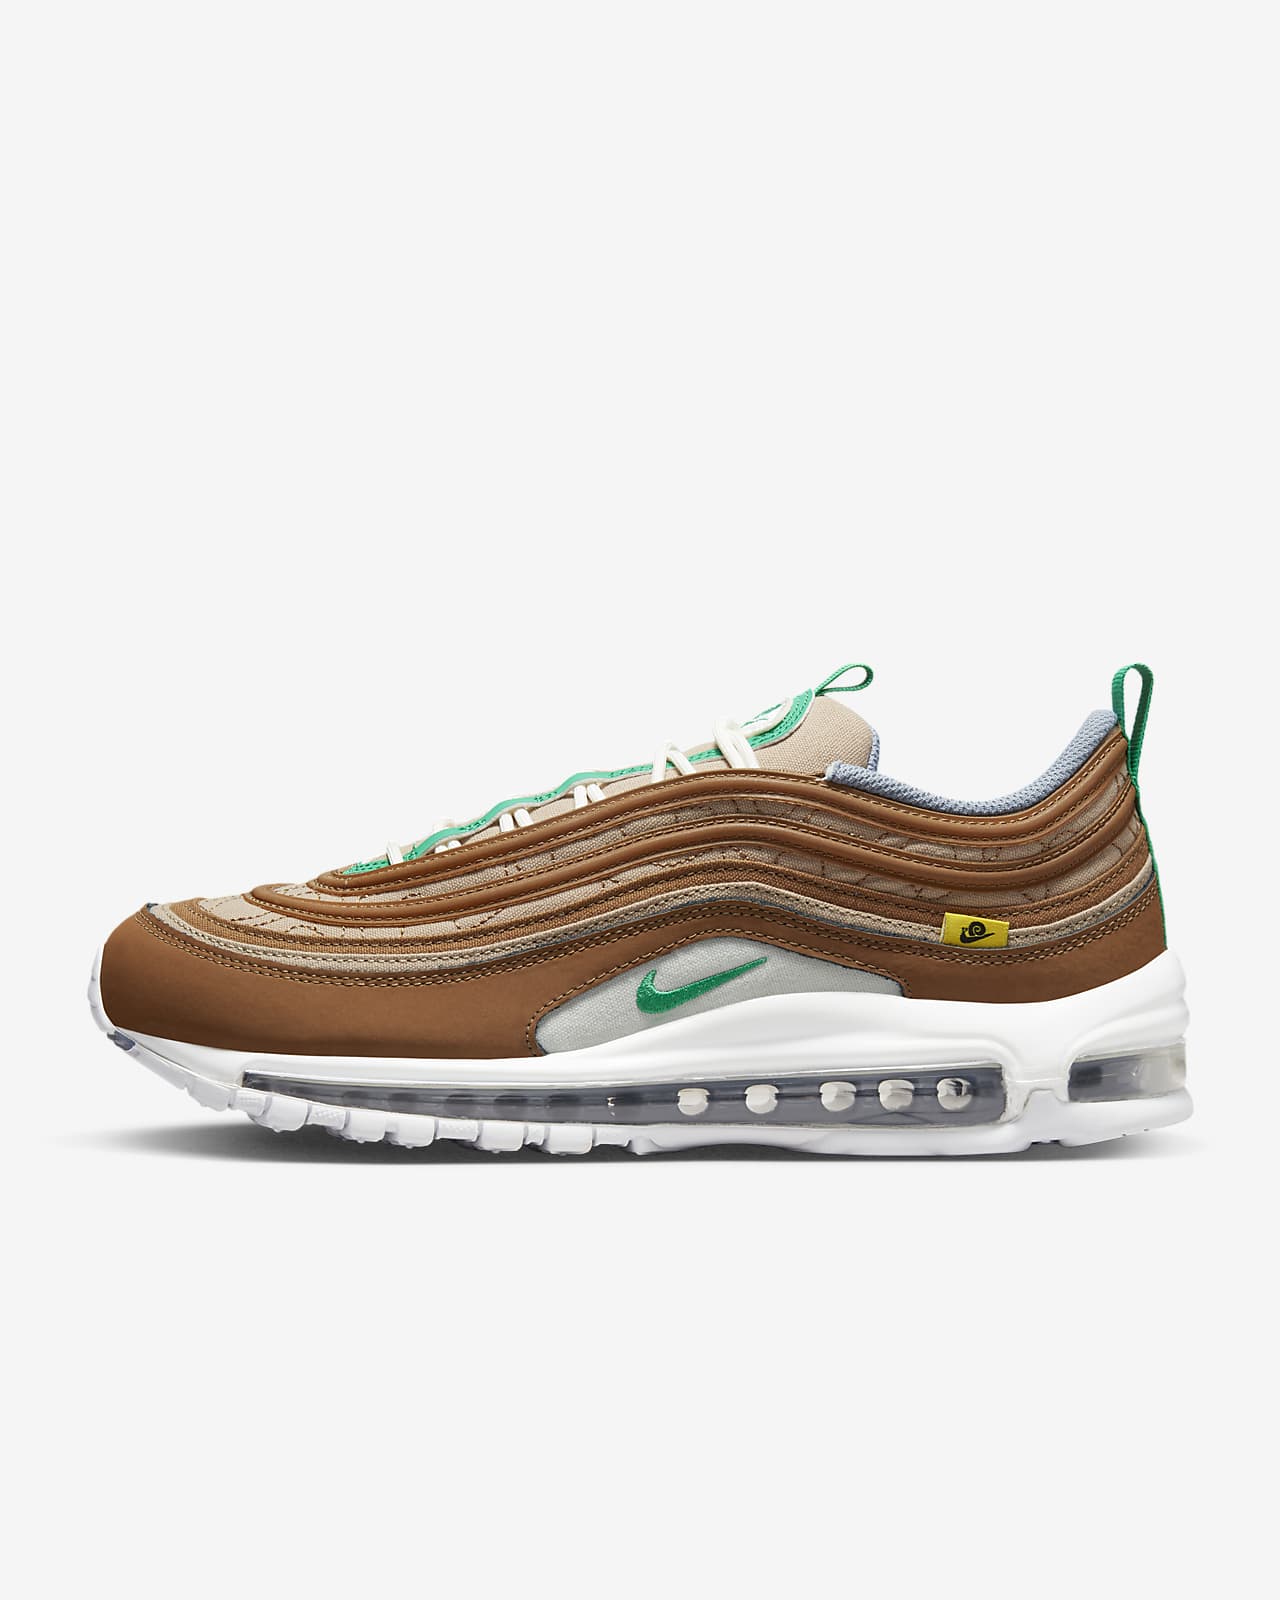 Chaussures Nike Air Max 97 SE pour Homme